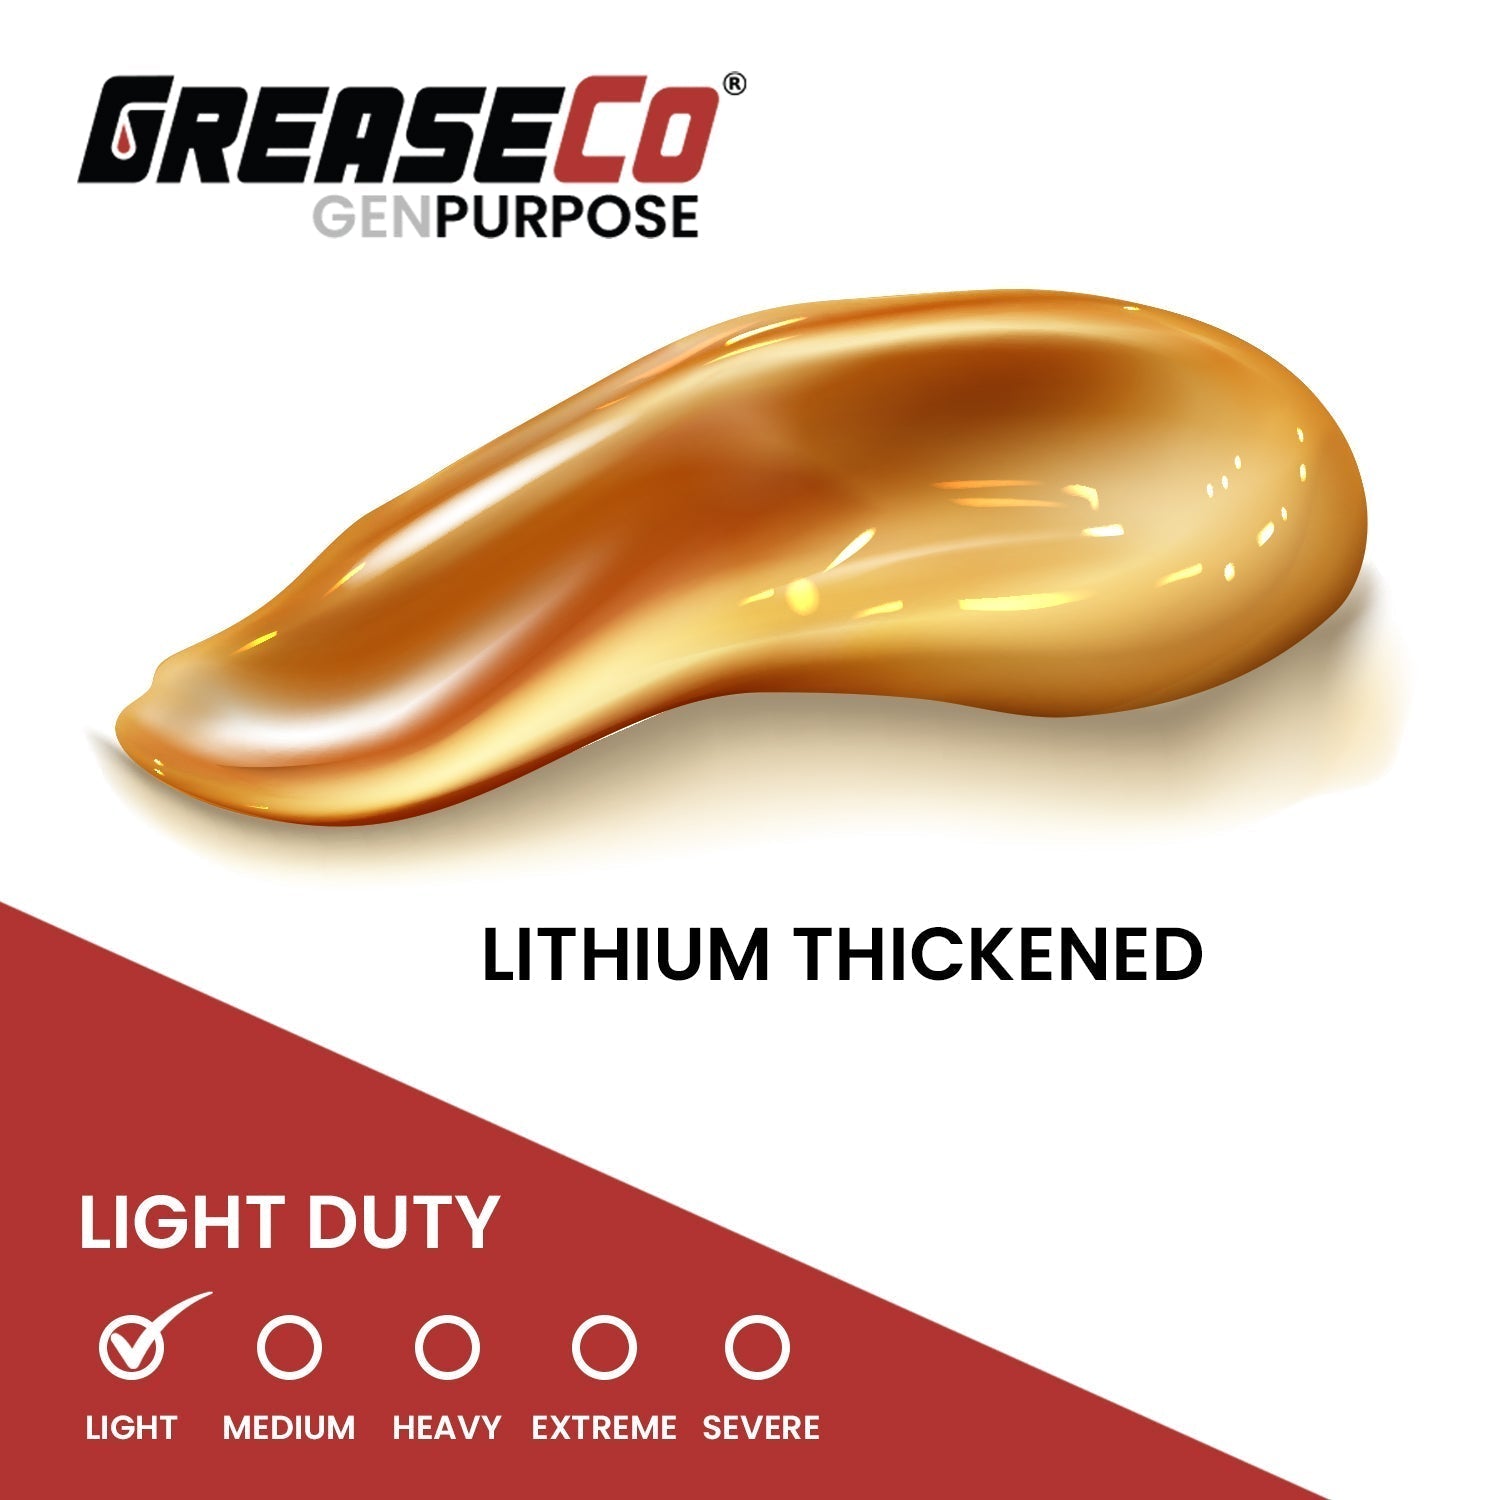 Lithium Complex General Purpose Temp High Performance Grease of GreaseCo GenPurpose